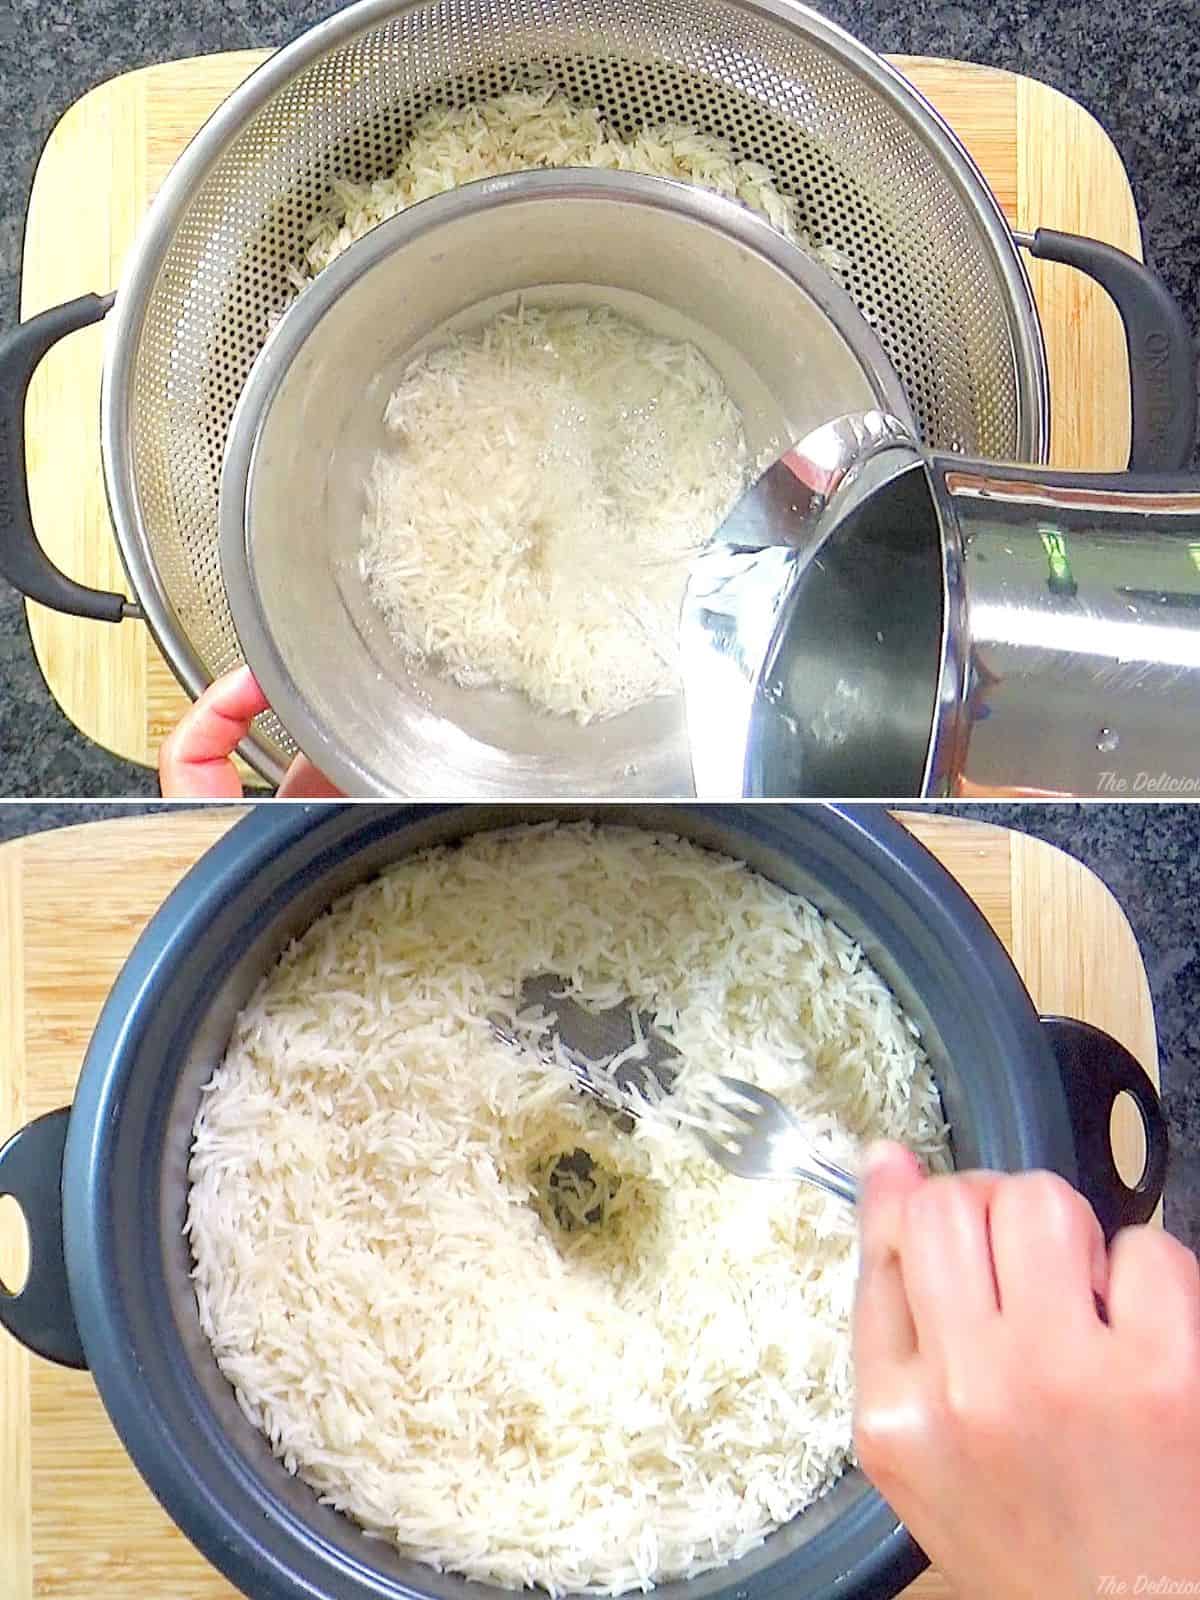 Rinsing rice and cooking in rice cooker.